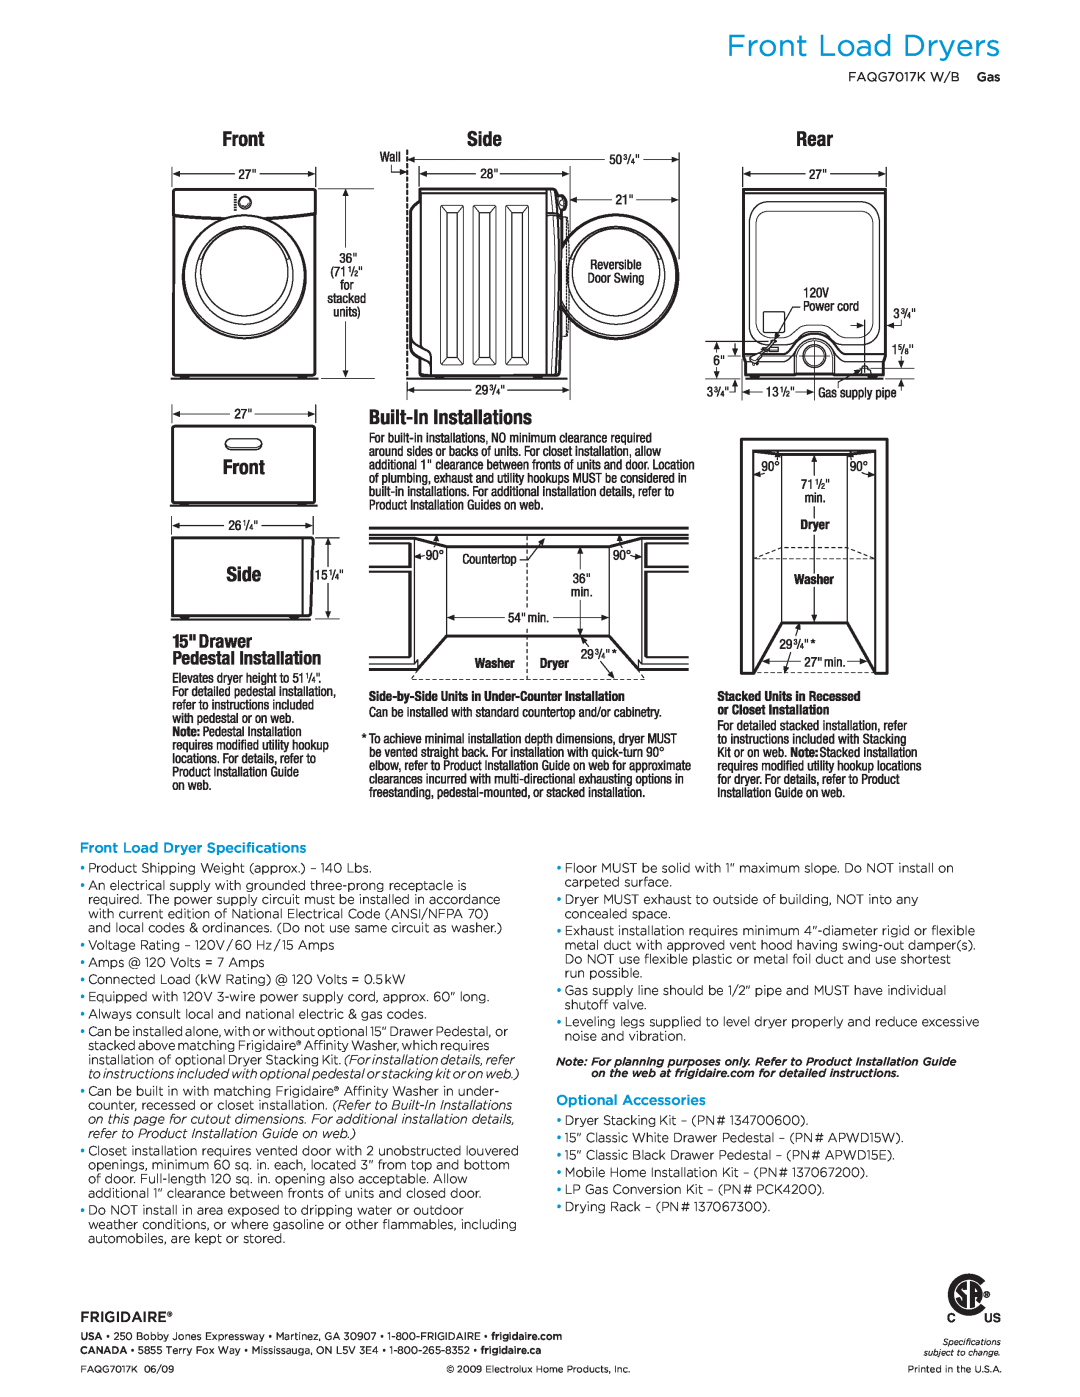 Frigidaire FAQG7017KB, FAQG7017KW Front Load Dryer Specifications, Optional Accessories, Frigidaire, Front Load Dryers 